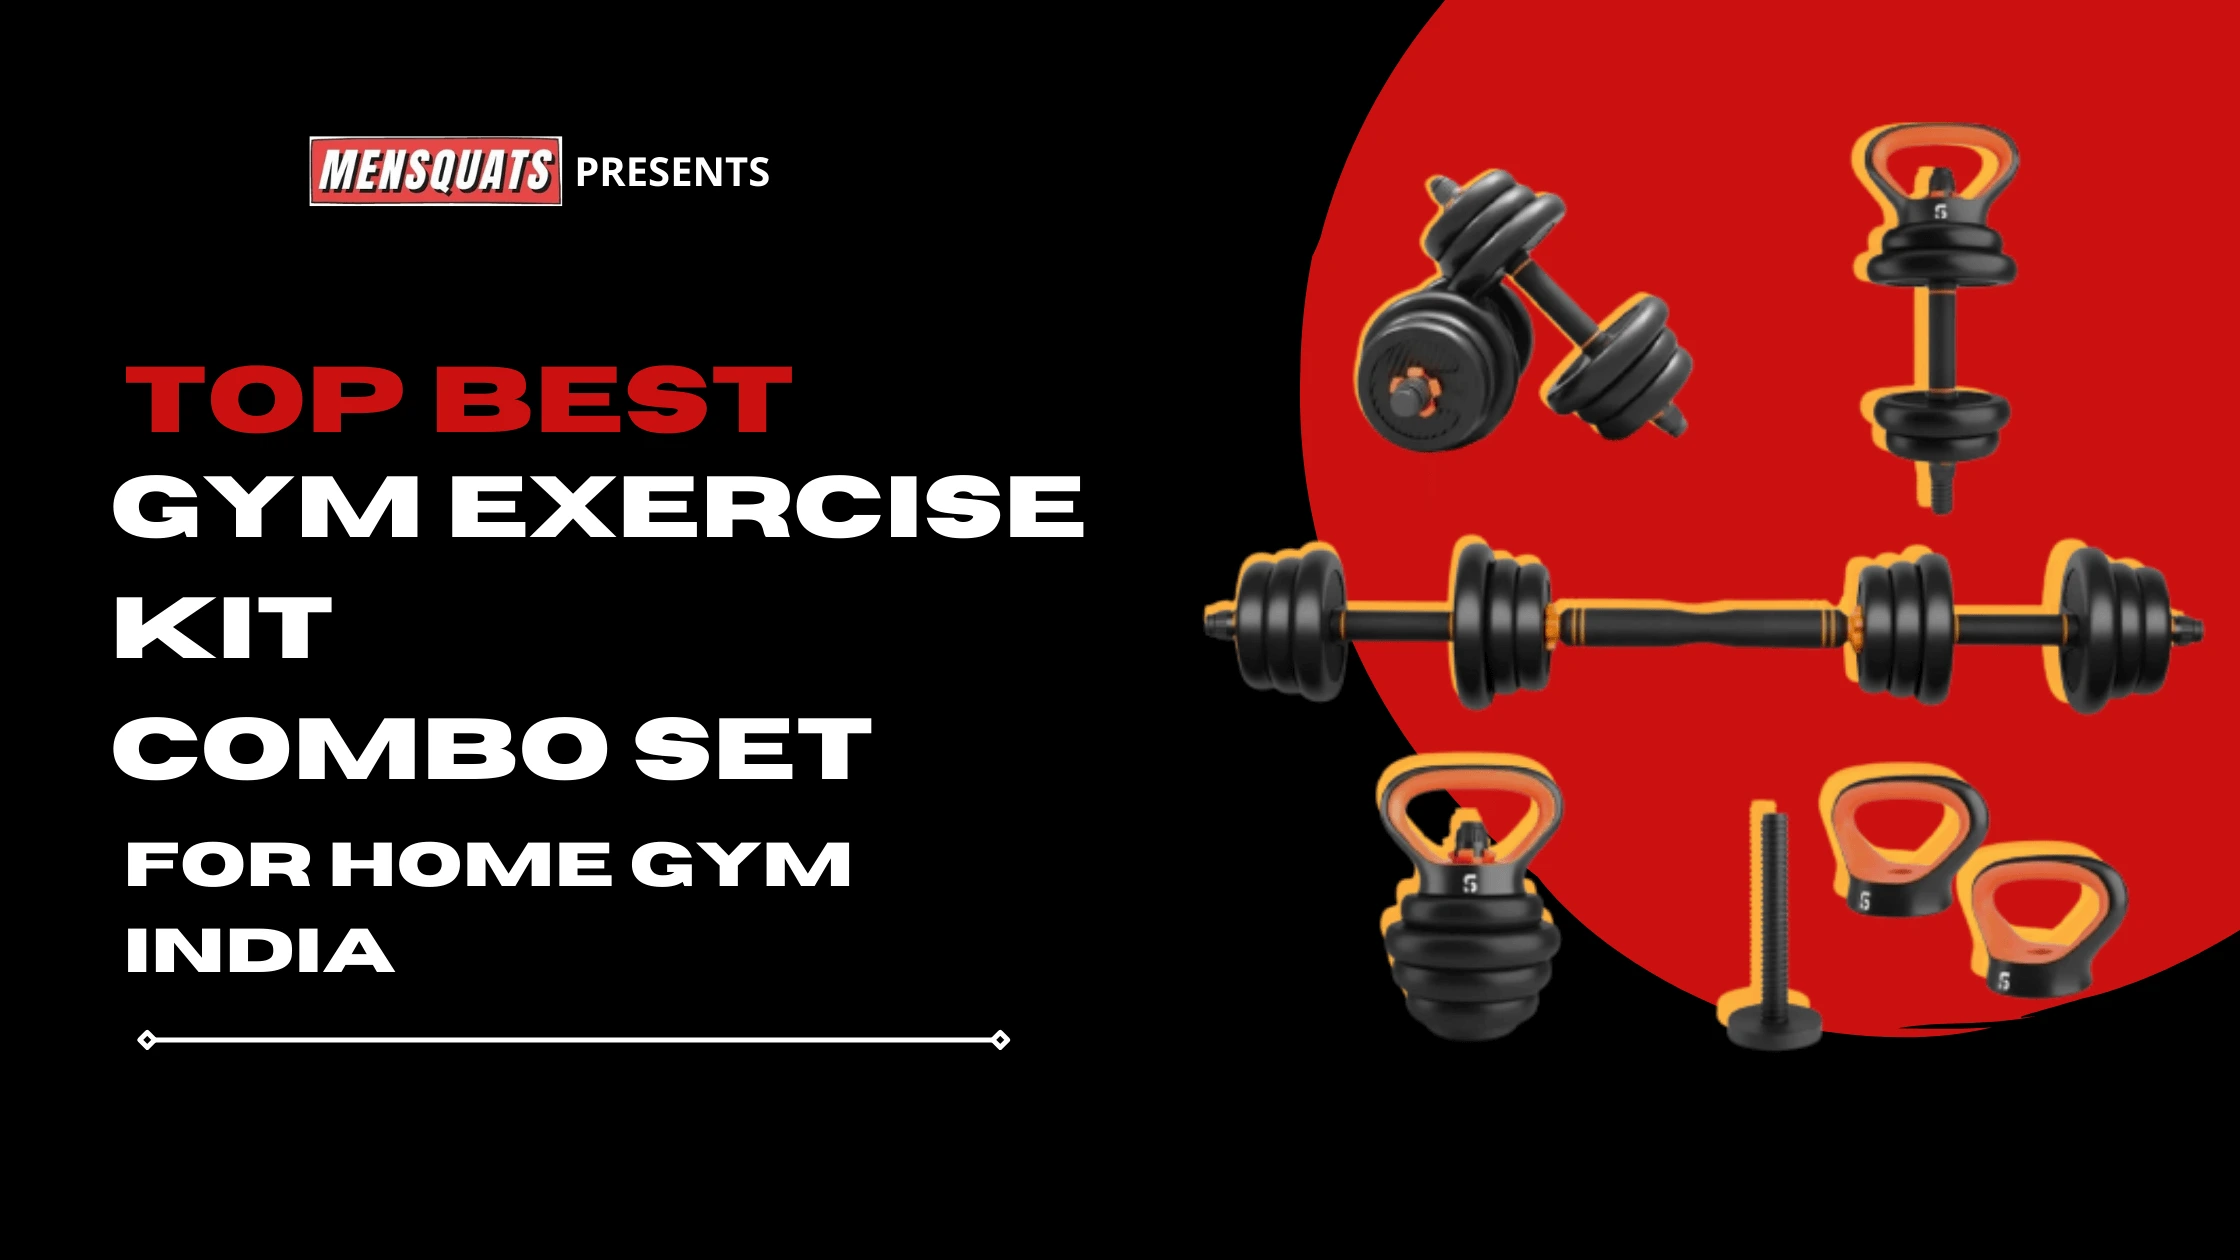 Best exercise kit for home Best home workout kit Weight lifting kit for home Home gym starter kit gym kit price in India Full home gym kit buy home gym set Home gym kit 20 kg Home gym kit 50 kg Buy home gym kit At home gym kit